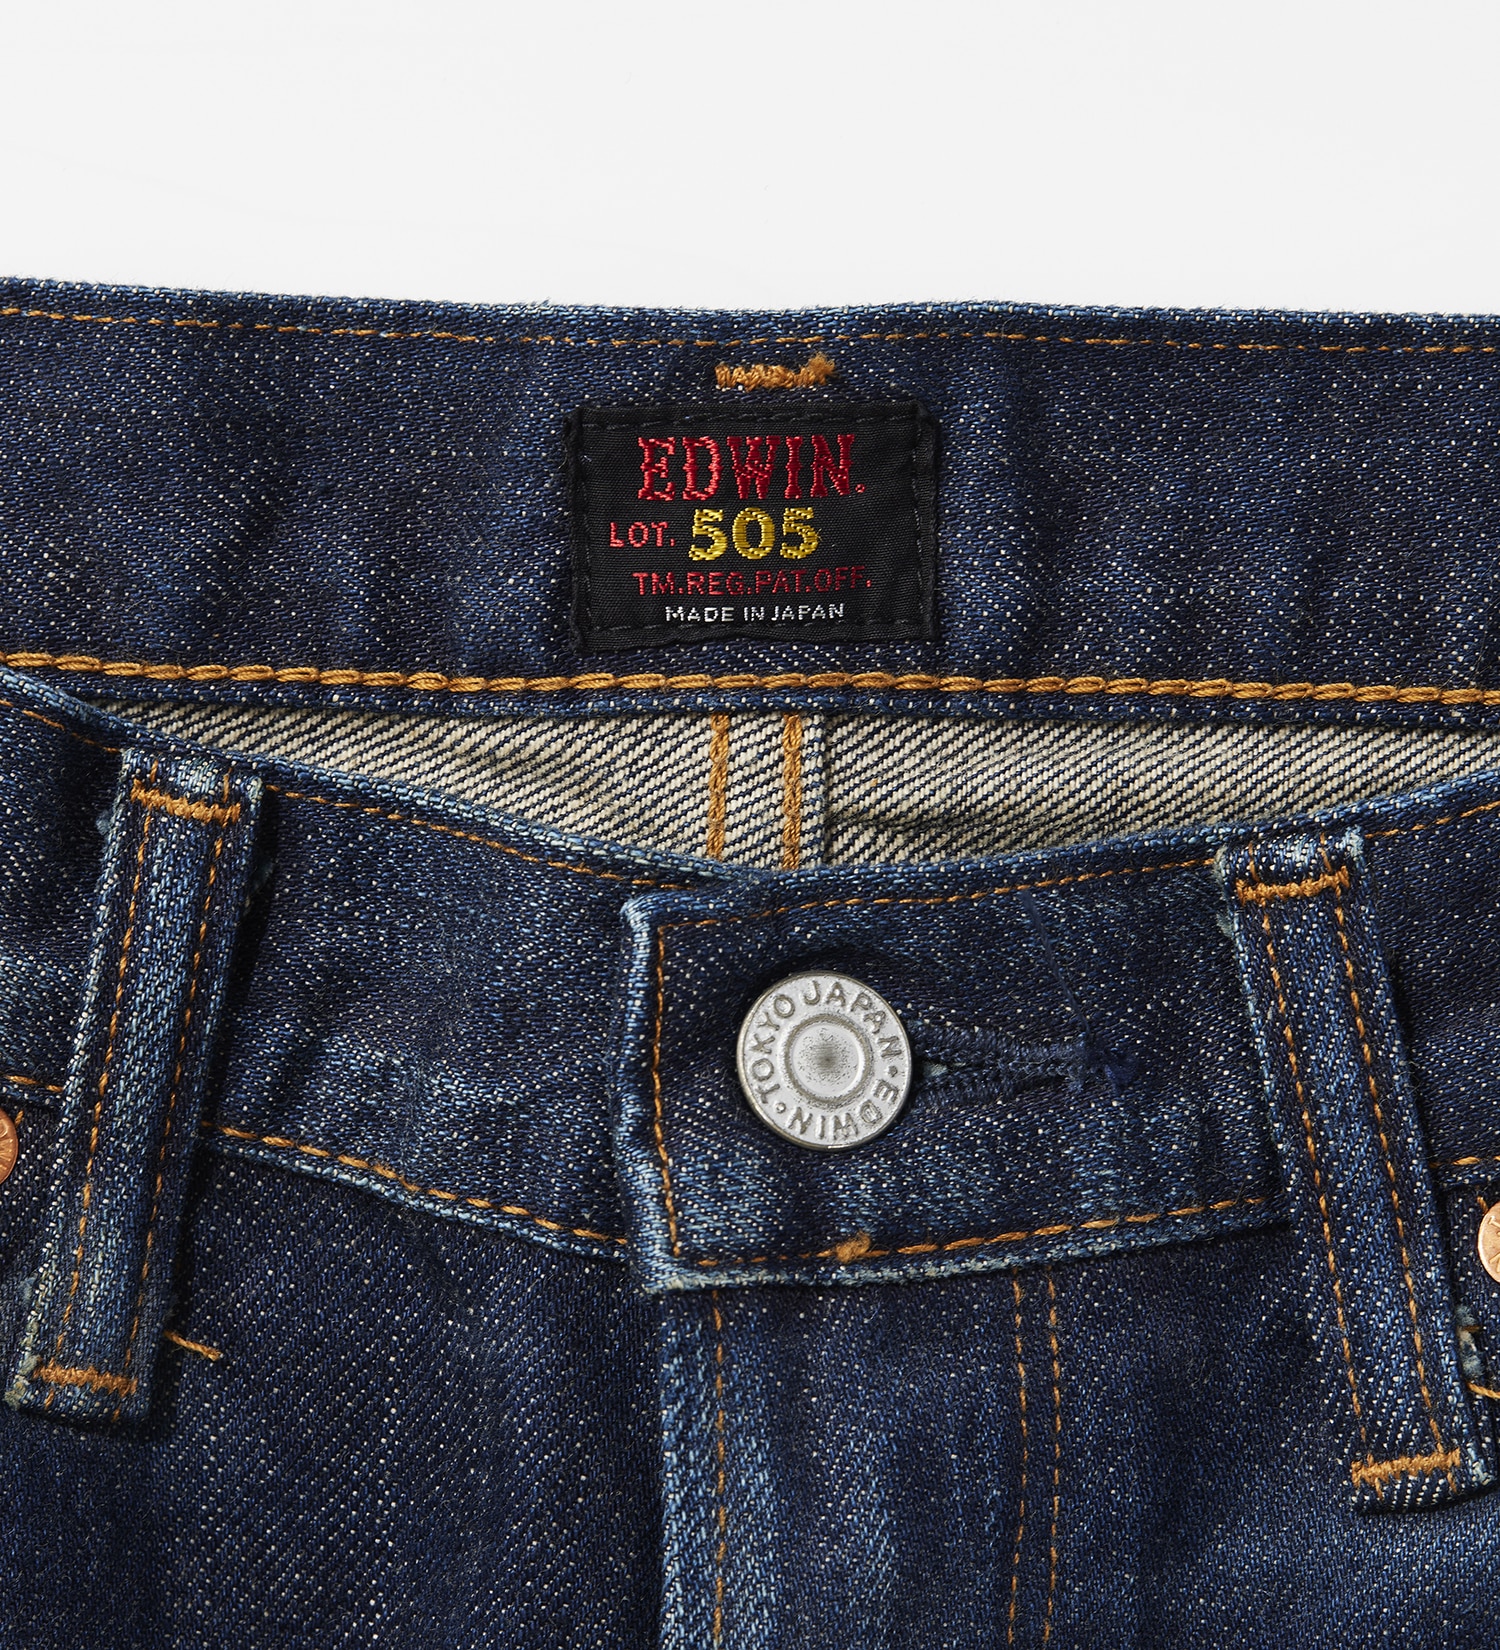 505Z ワイドストレートパンツ SELVAGE VINTAGE WIDE STRAIGHT MADE IN JAPAN 日本製 セルビッチ